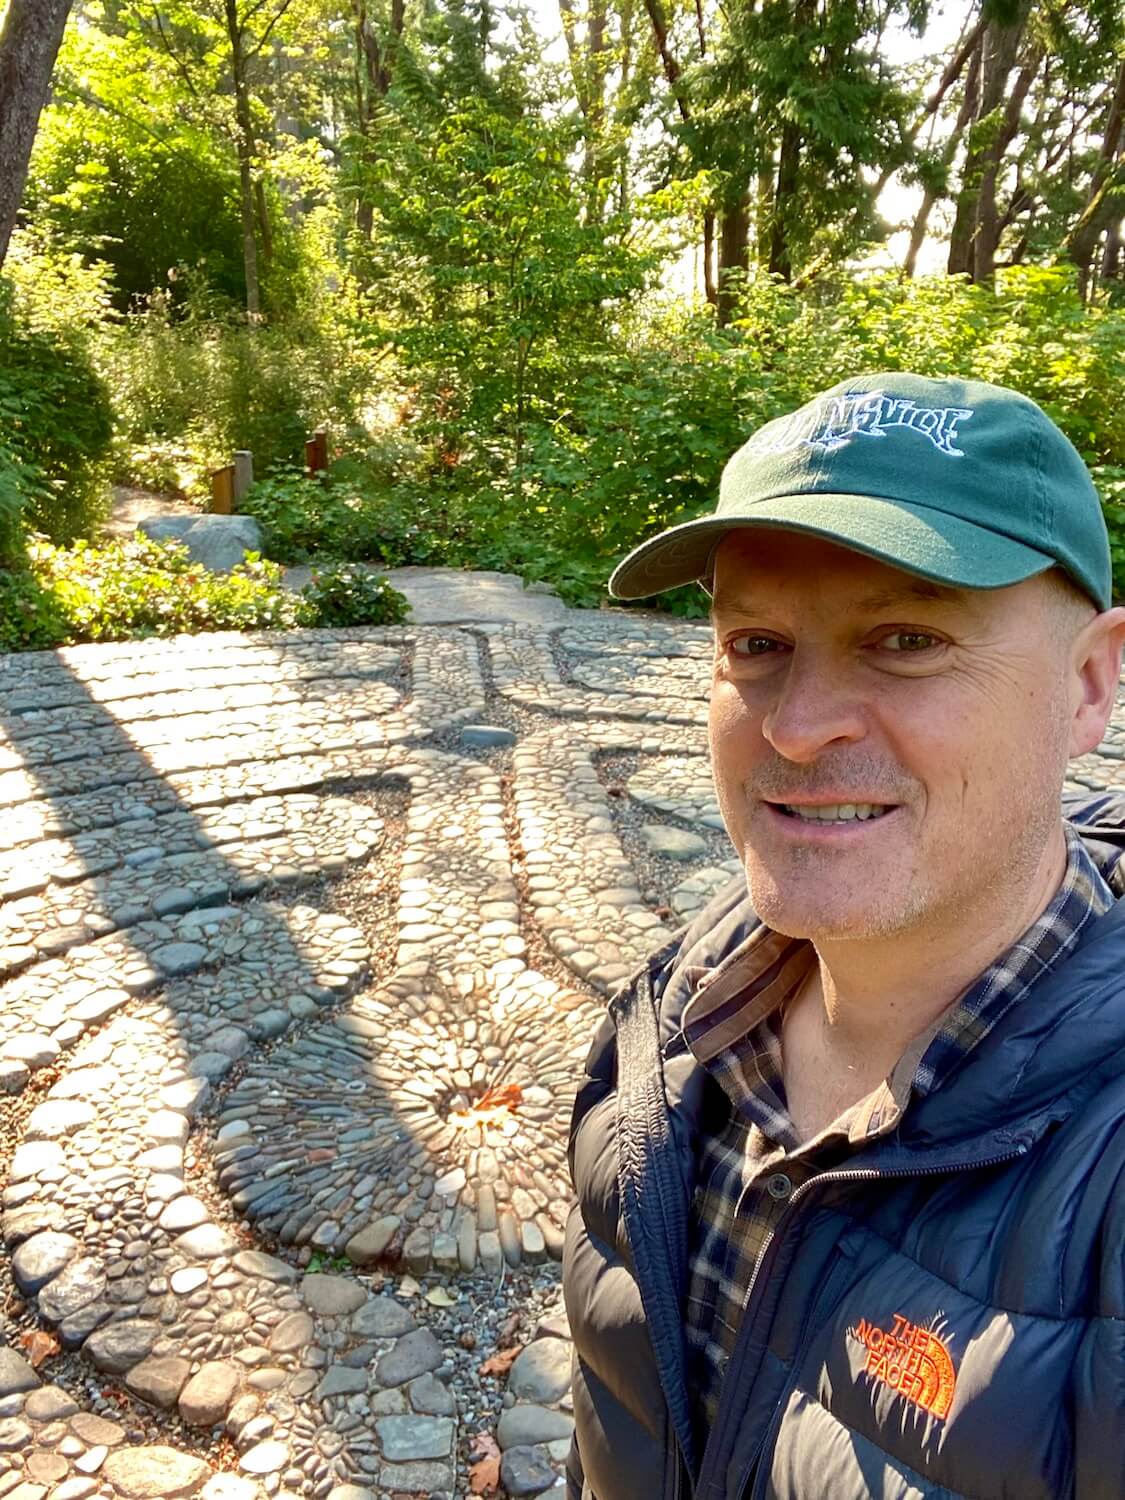 Matthew Kessi smiles for a selfie in front of a Labyrinth on Bainbridge Island. The Labyrinth is made of stones collected from the island and this is under the canopy of a fir forest.